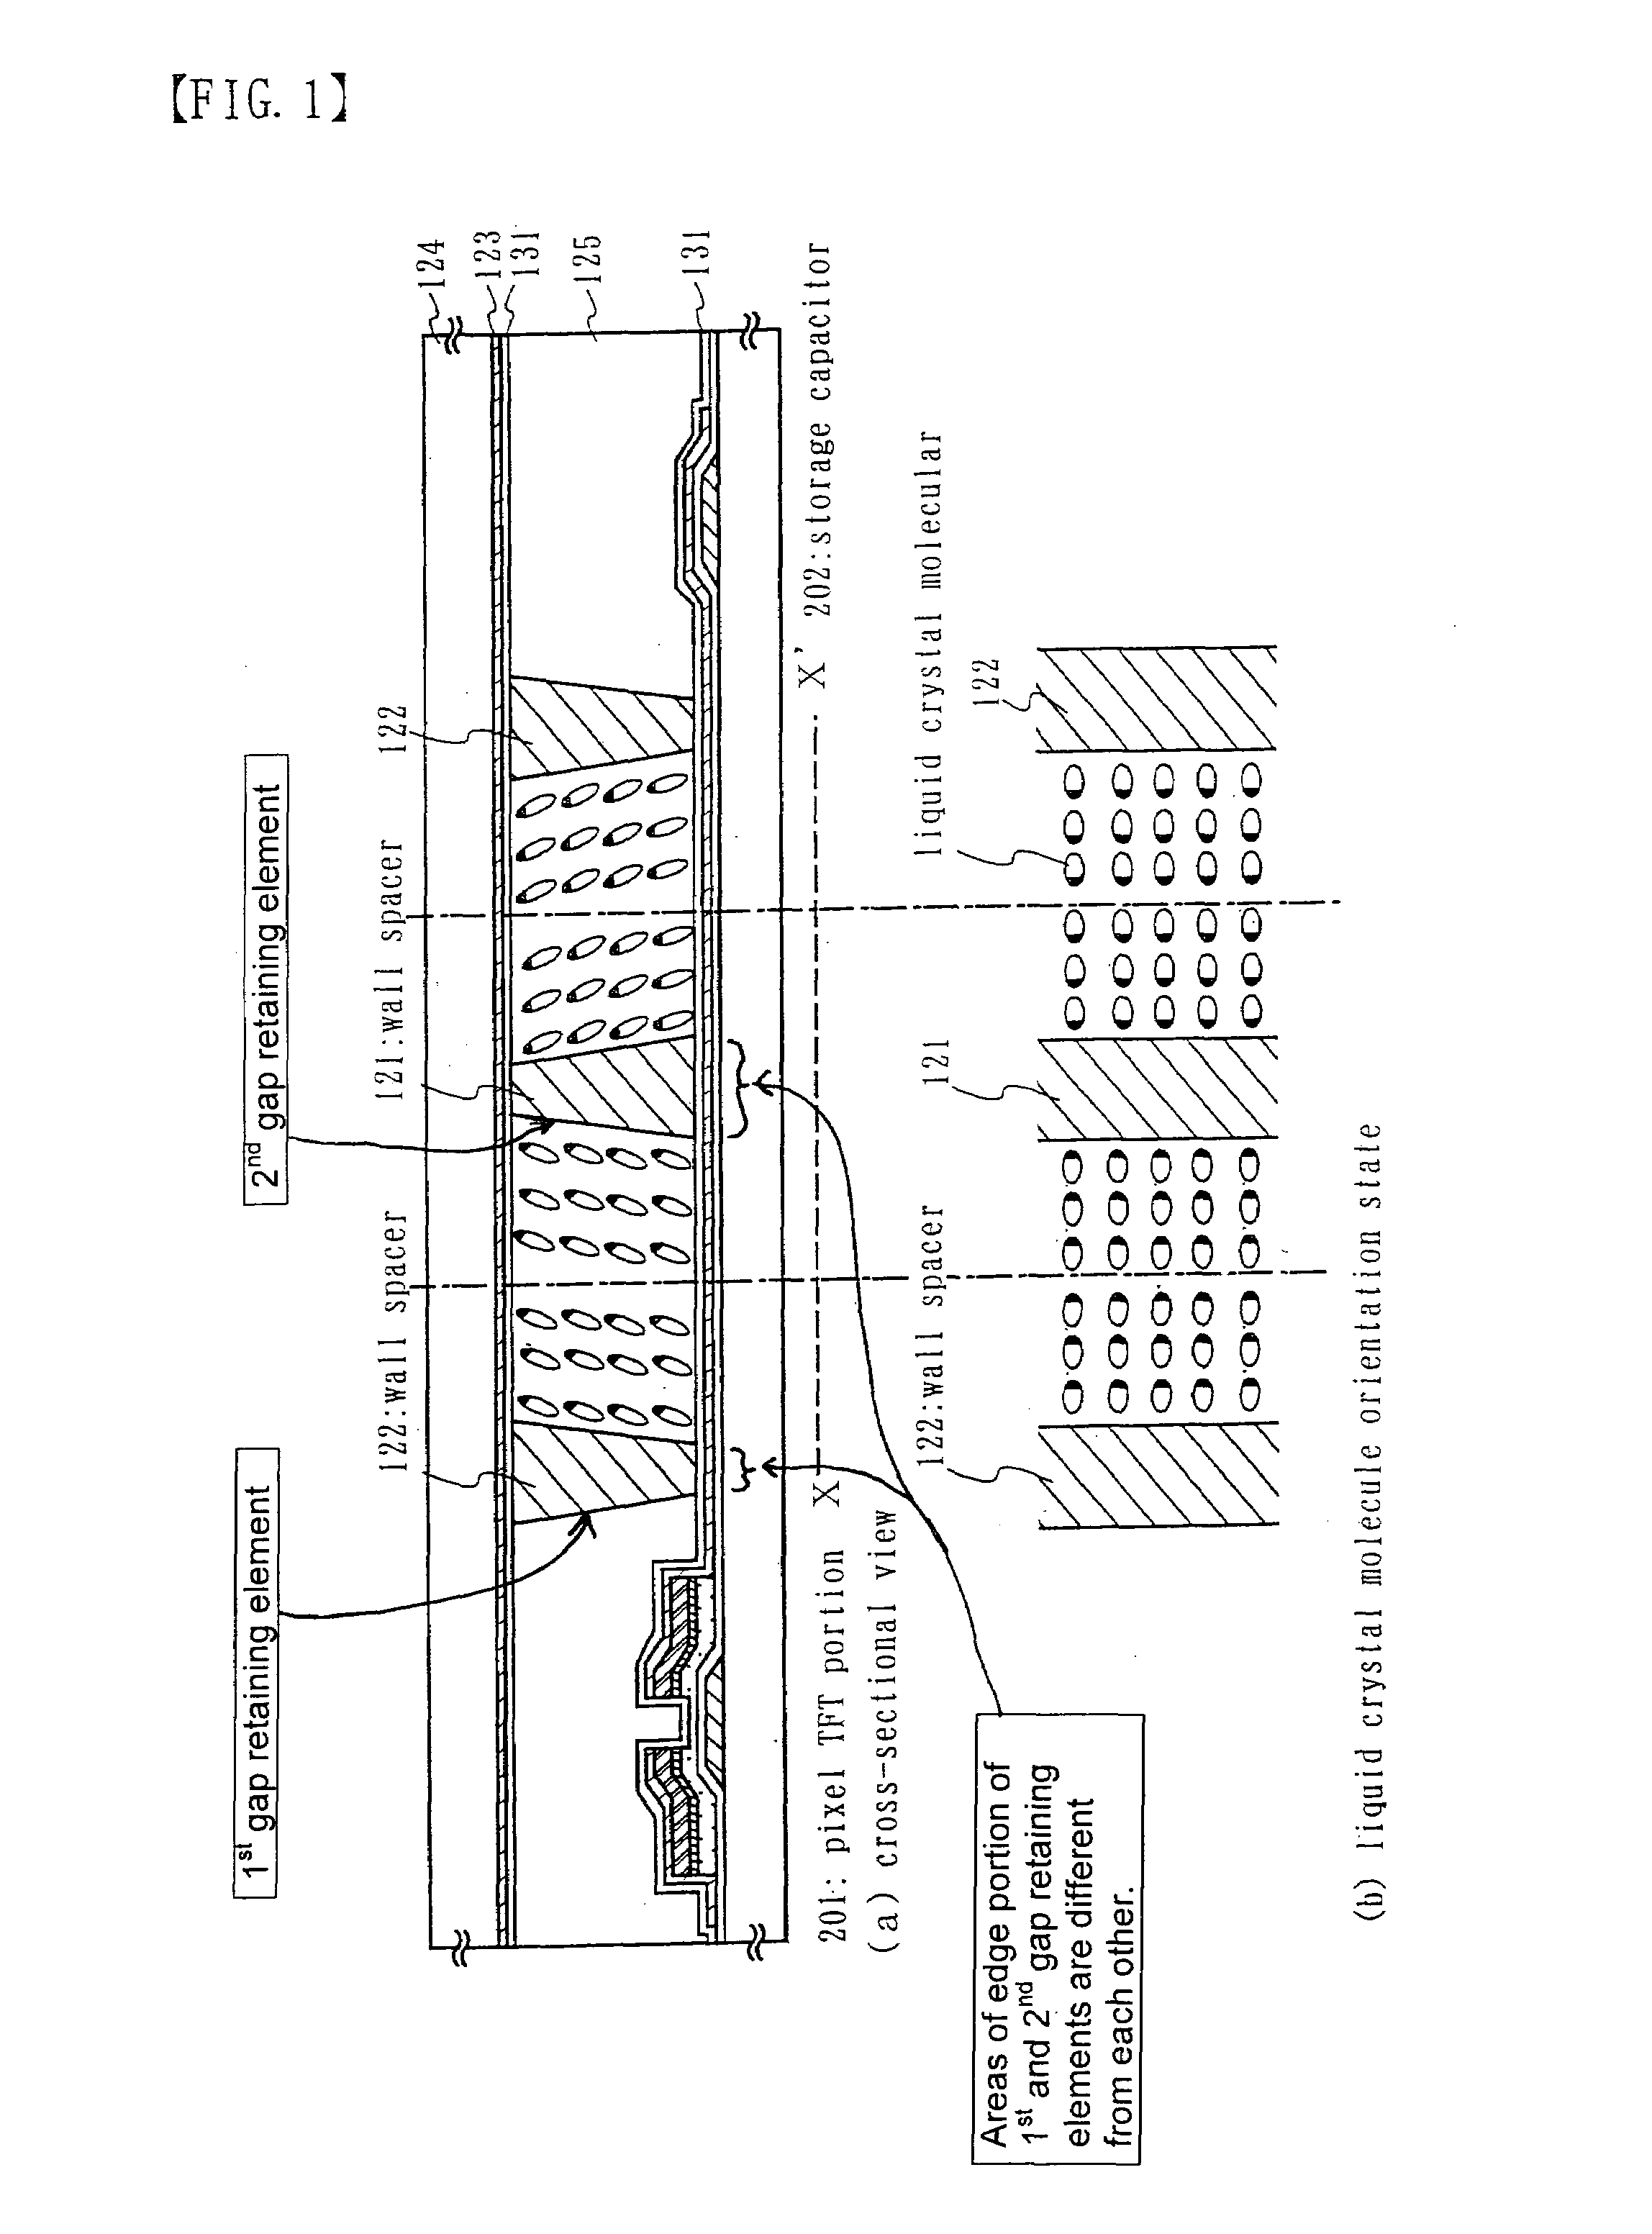 Liquid crystal display device and manfacturing method thereof